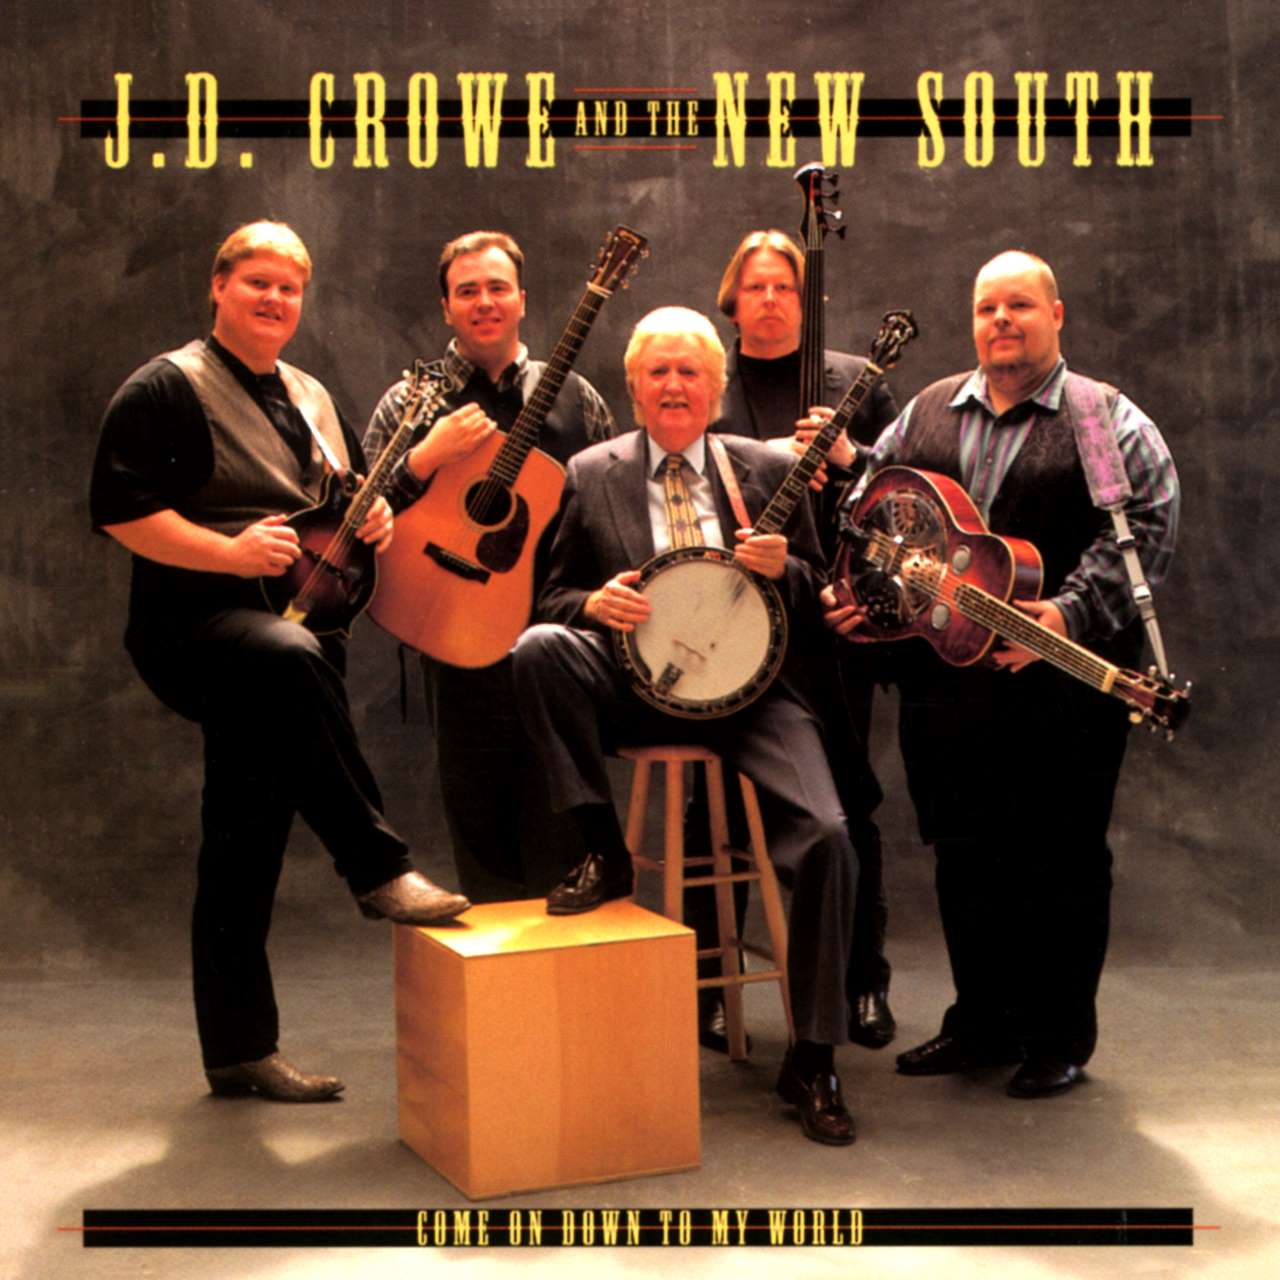 J.D. Crowe & The New South - Come On Down To My World cover album